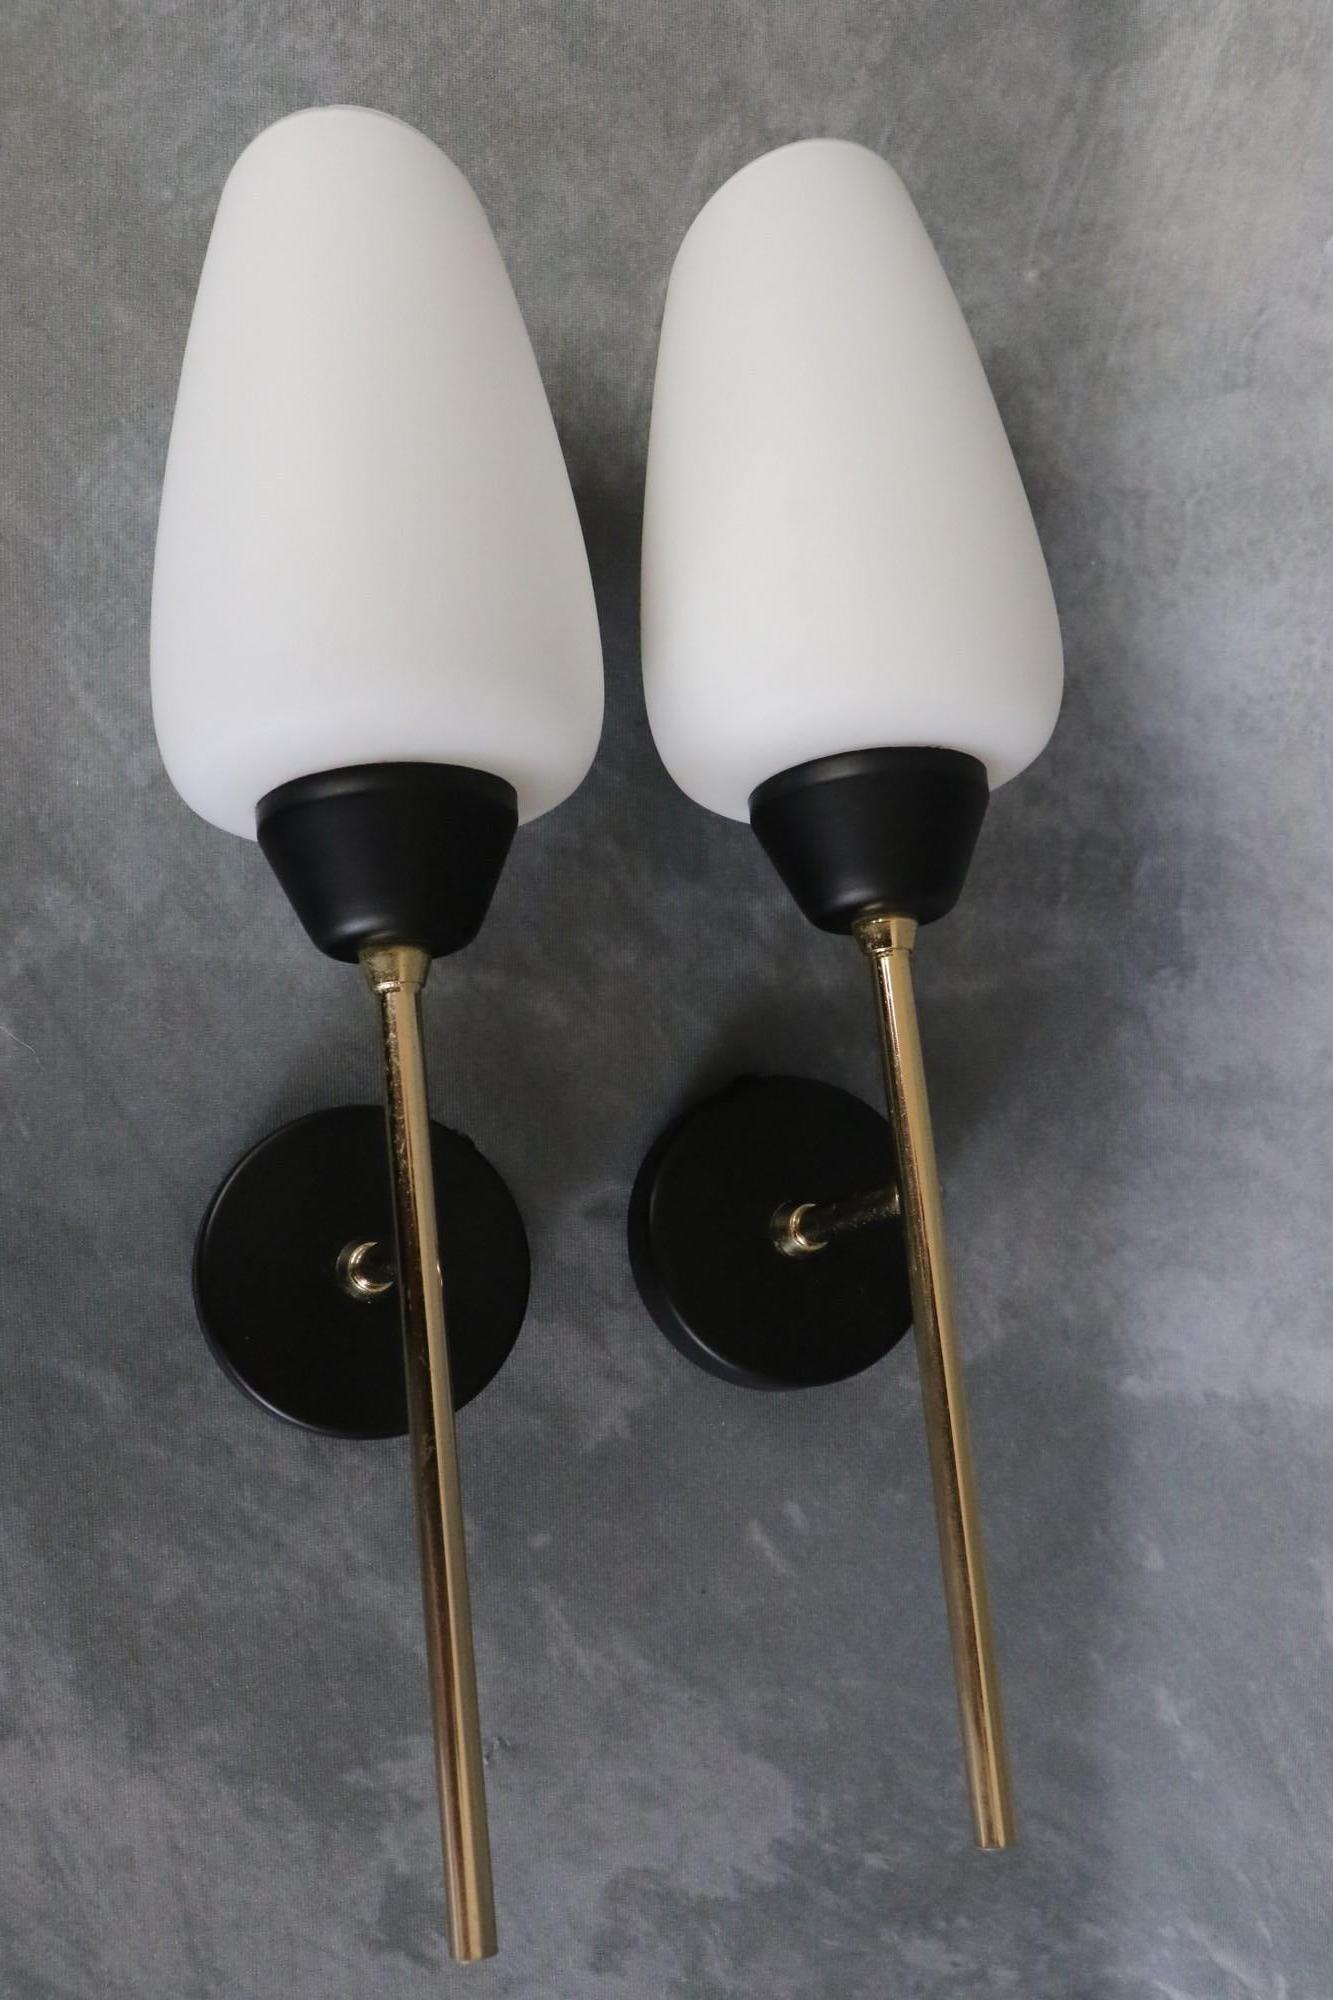 Maison Lunel - pair of Mid-Century Modern wall lights - 1950s France.

Very nice pair of sconces in the 50's design. 
They are all in contrast: the luminous and milky whiteness of the opaline is opposed to the dark base of the blackened brass,